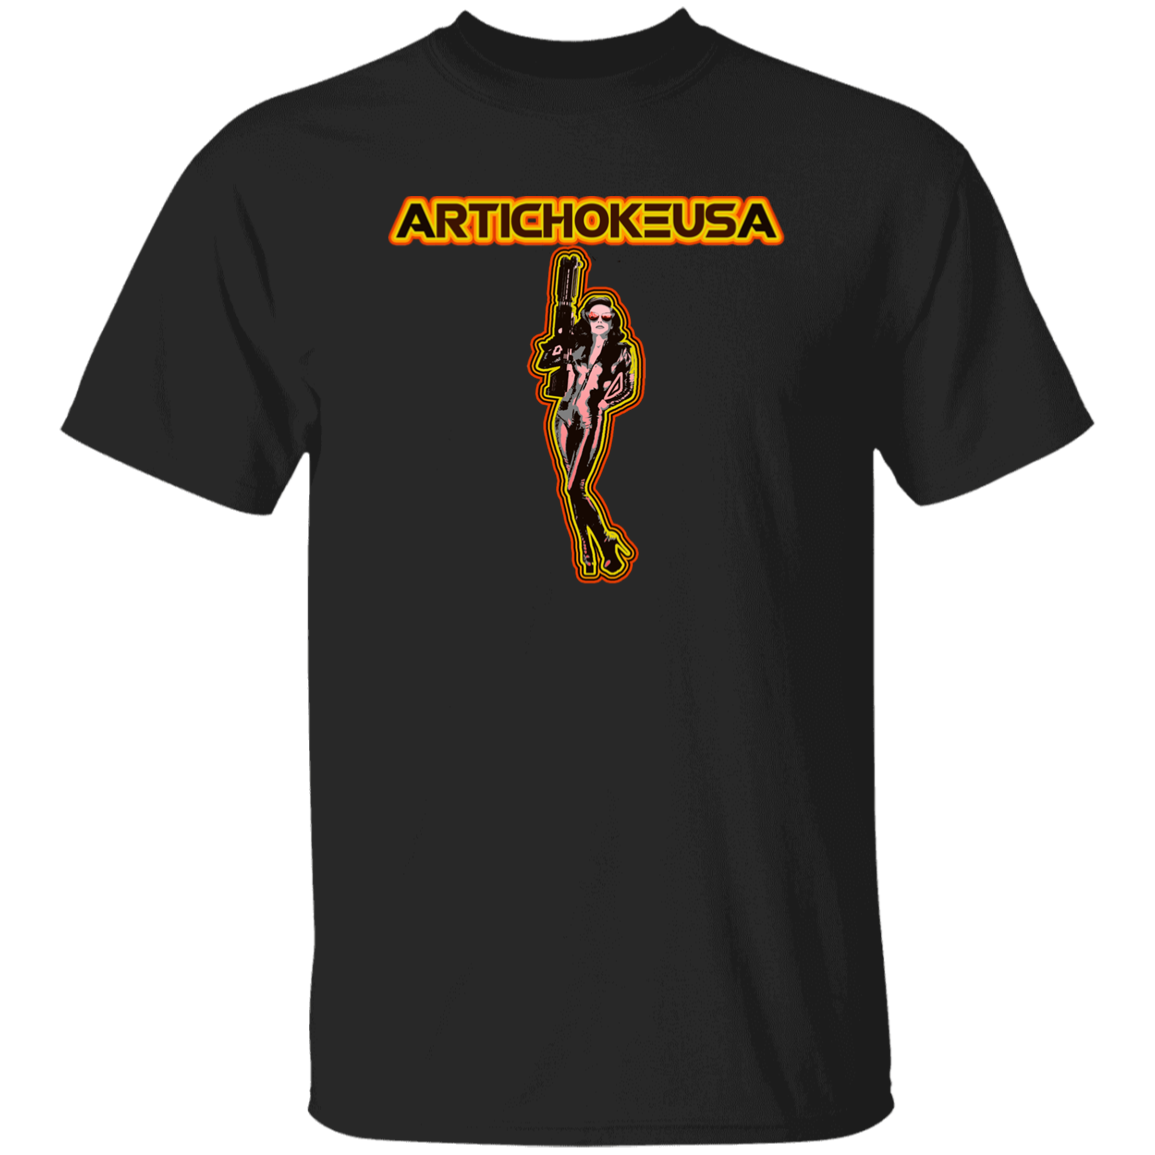 ArtichokeUSA Character and Font design. Let's Create Your Own Team Design Today. Mary Boom Boom. Youth 5.3 oz 100% Cotton T-Shirt